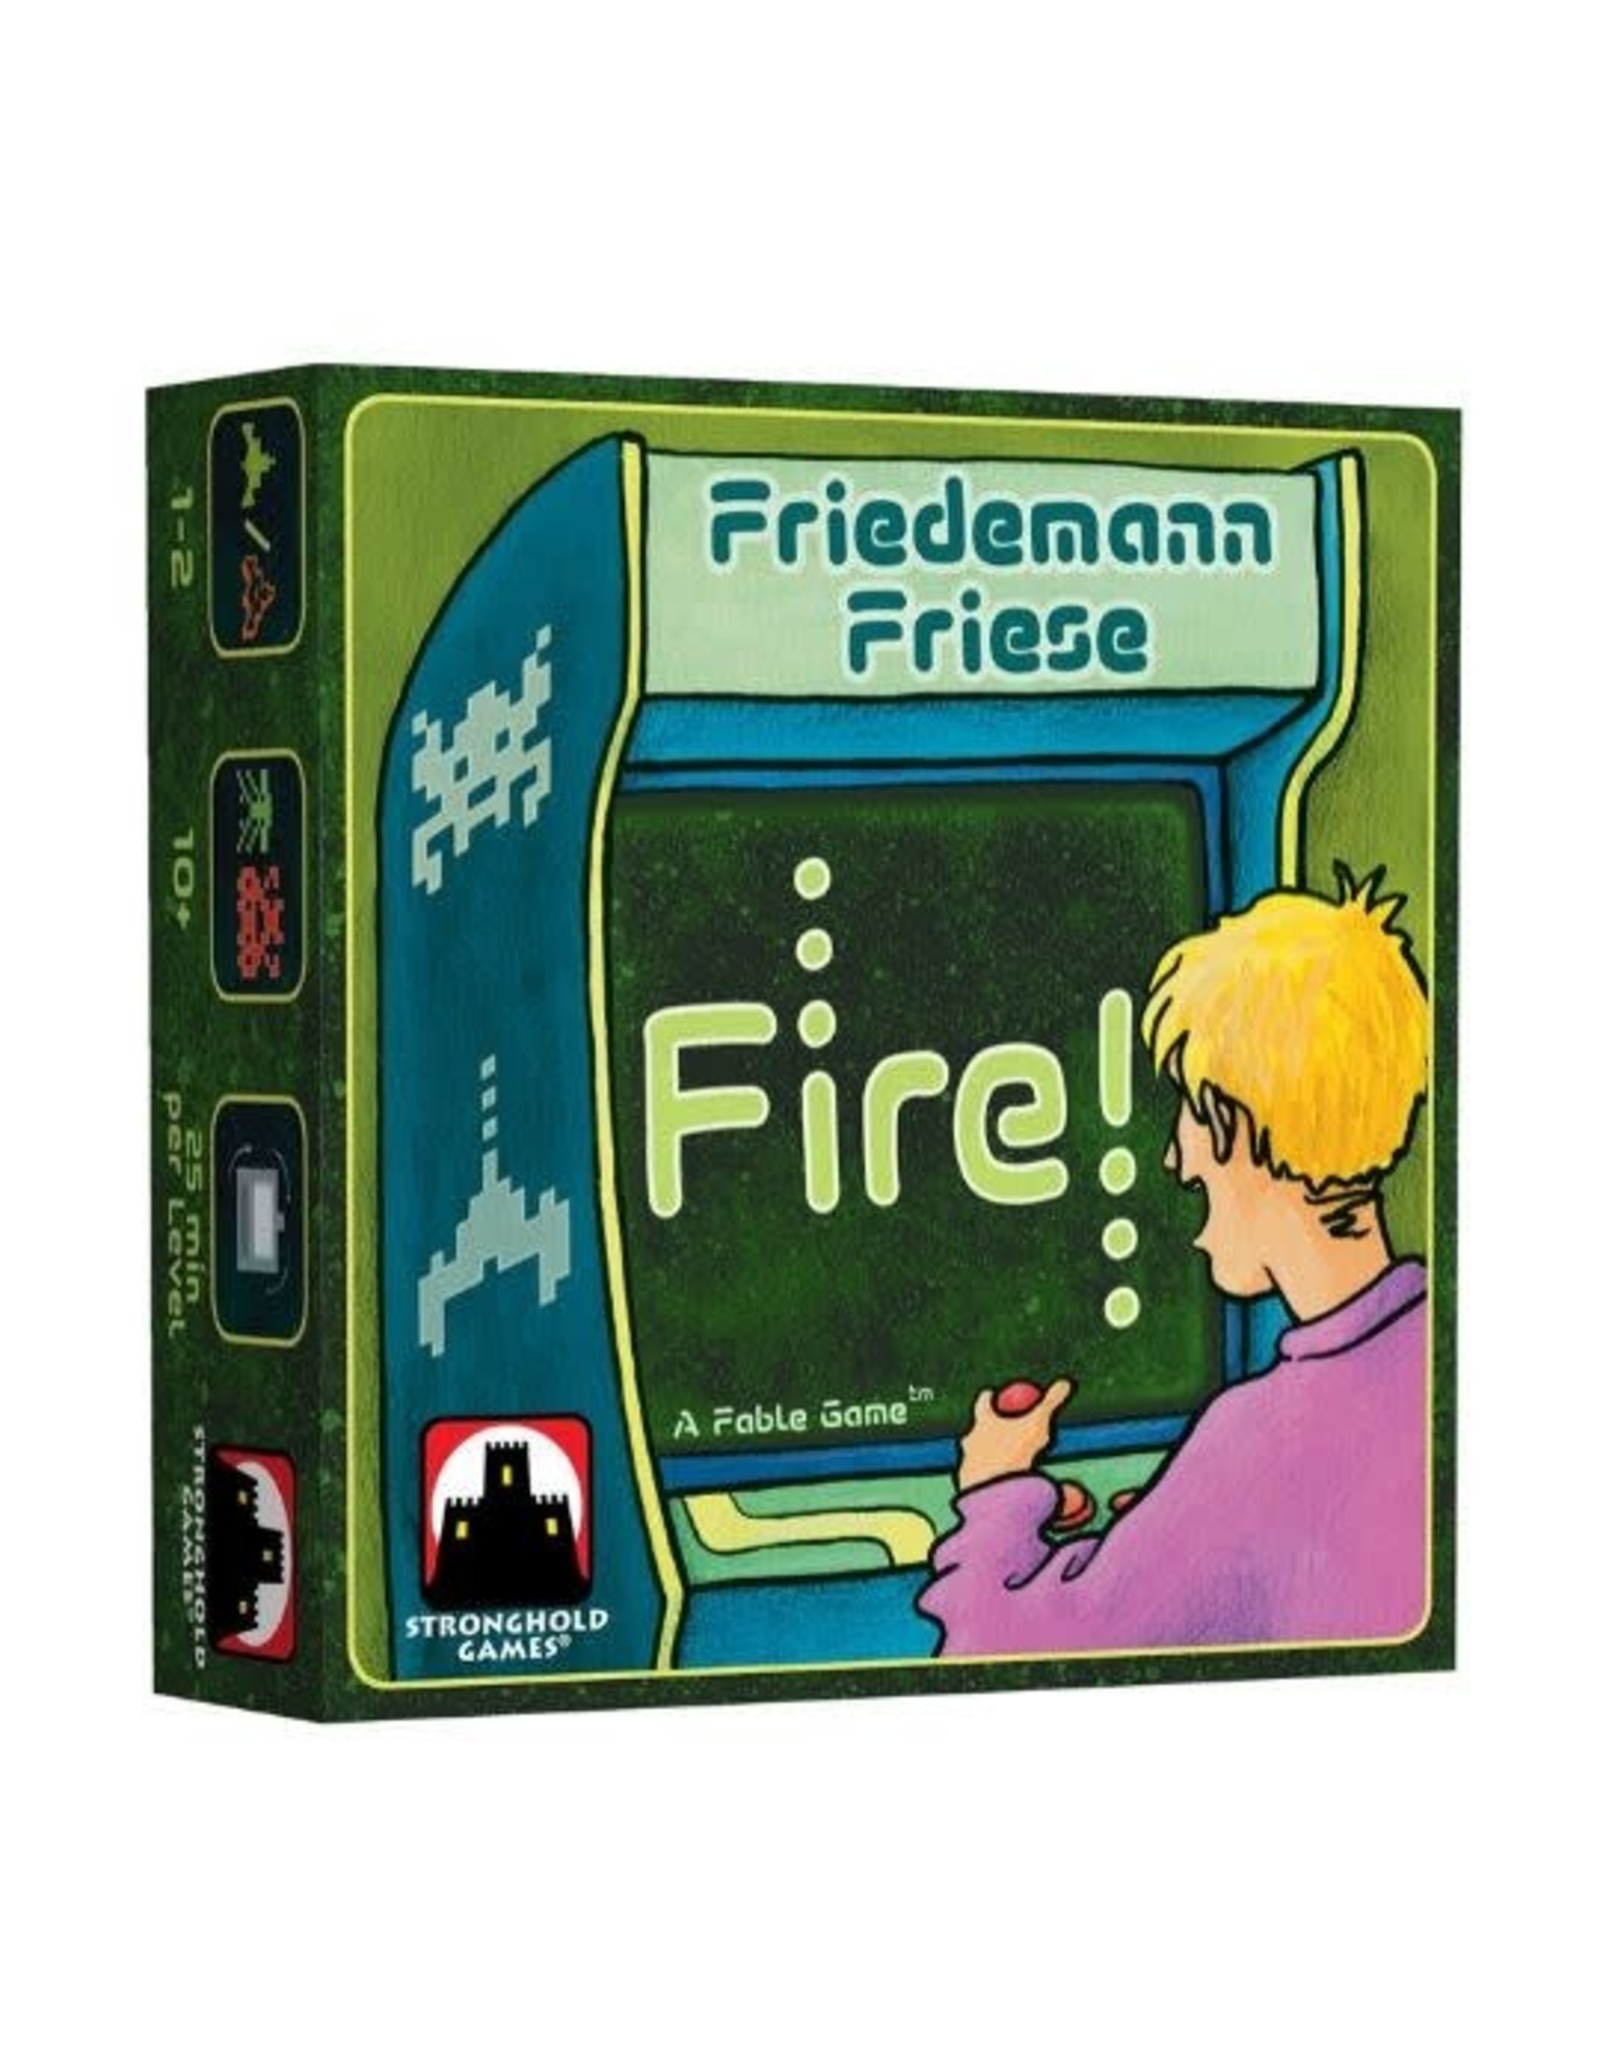 Stronghold Games Fire!